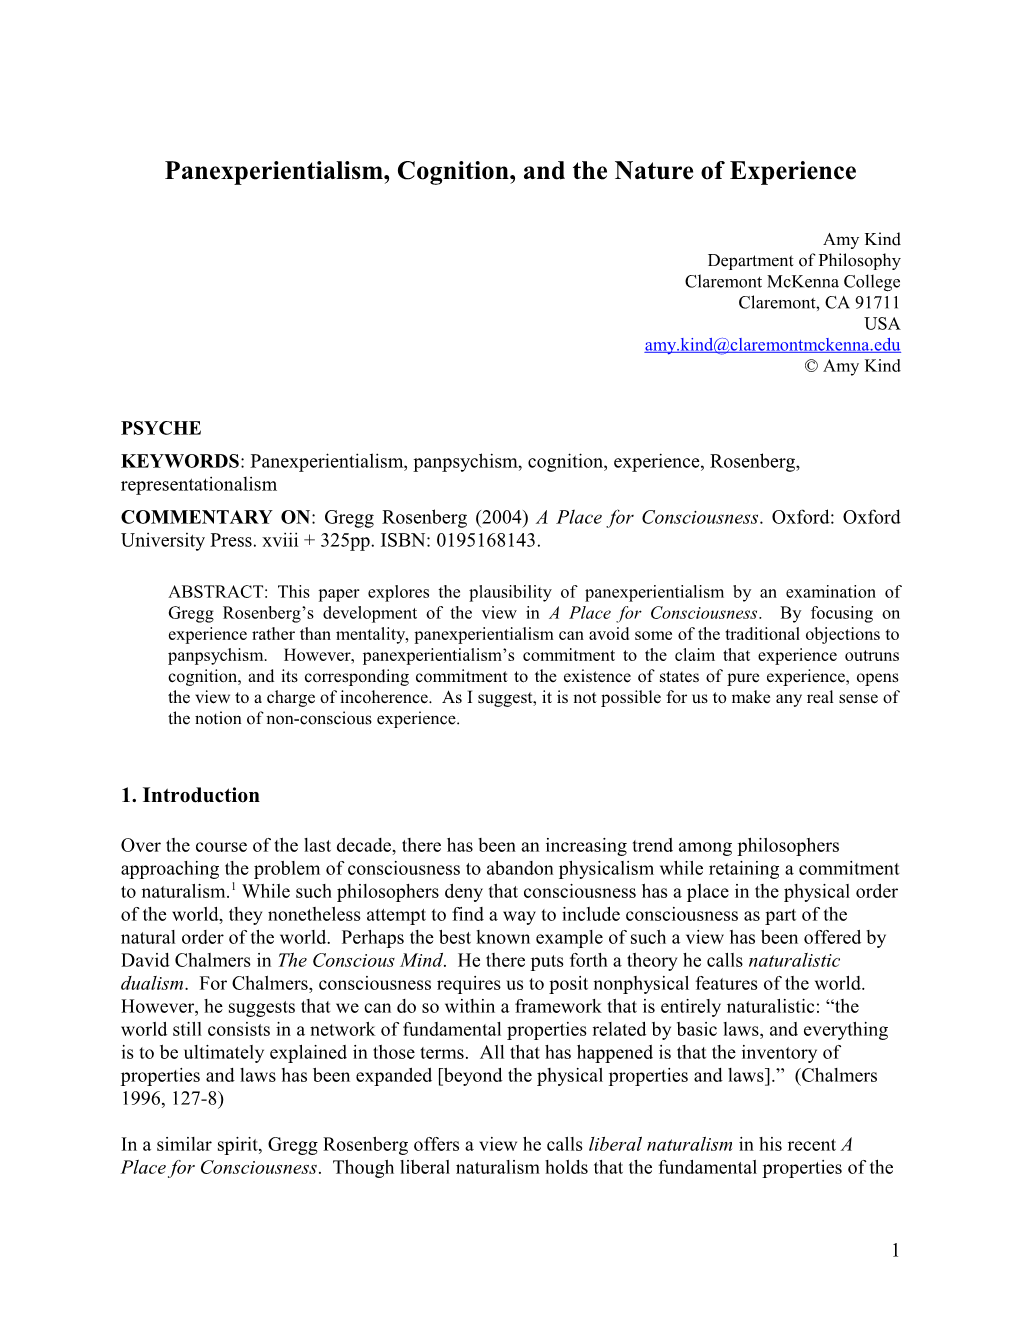 Panexperientialism, Cognition, and the Nature of Experience